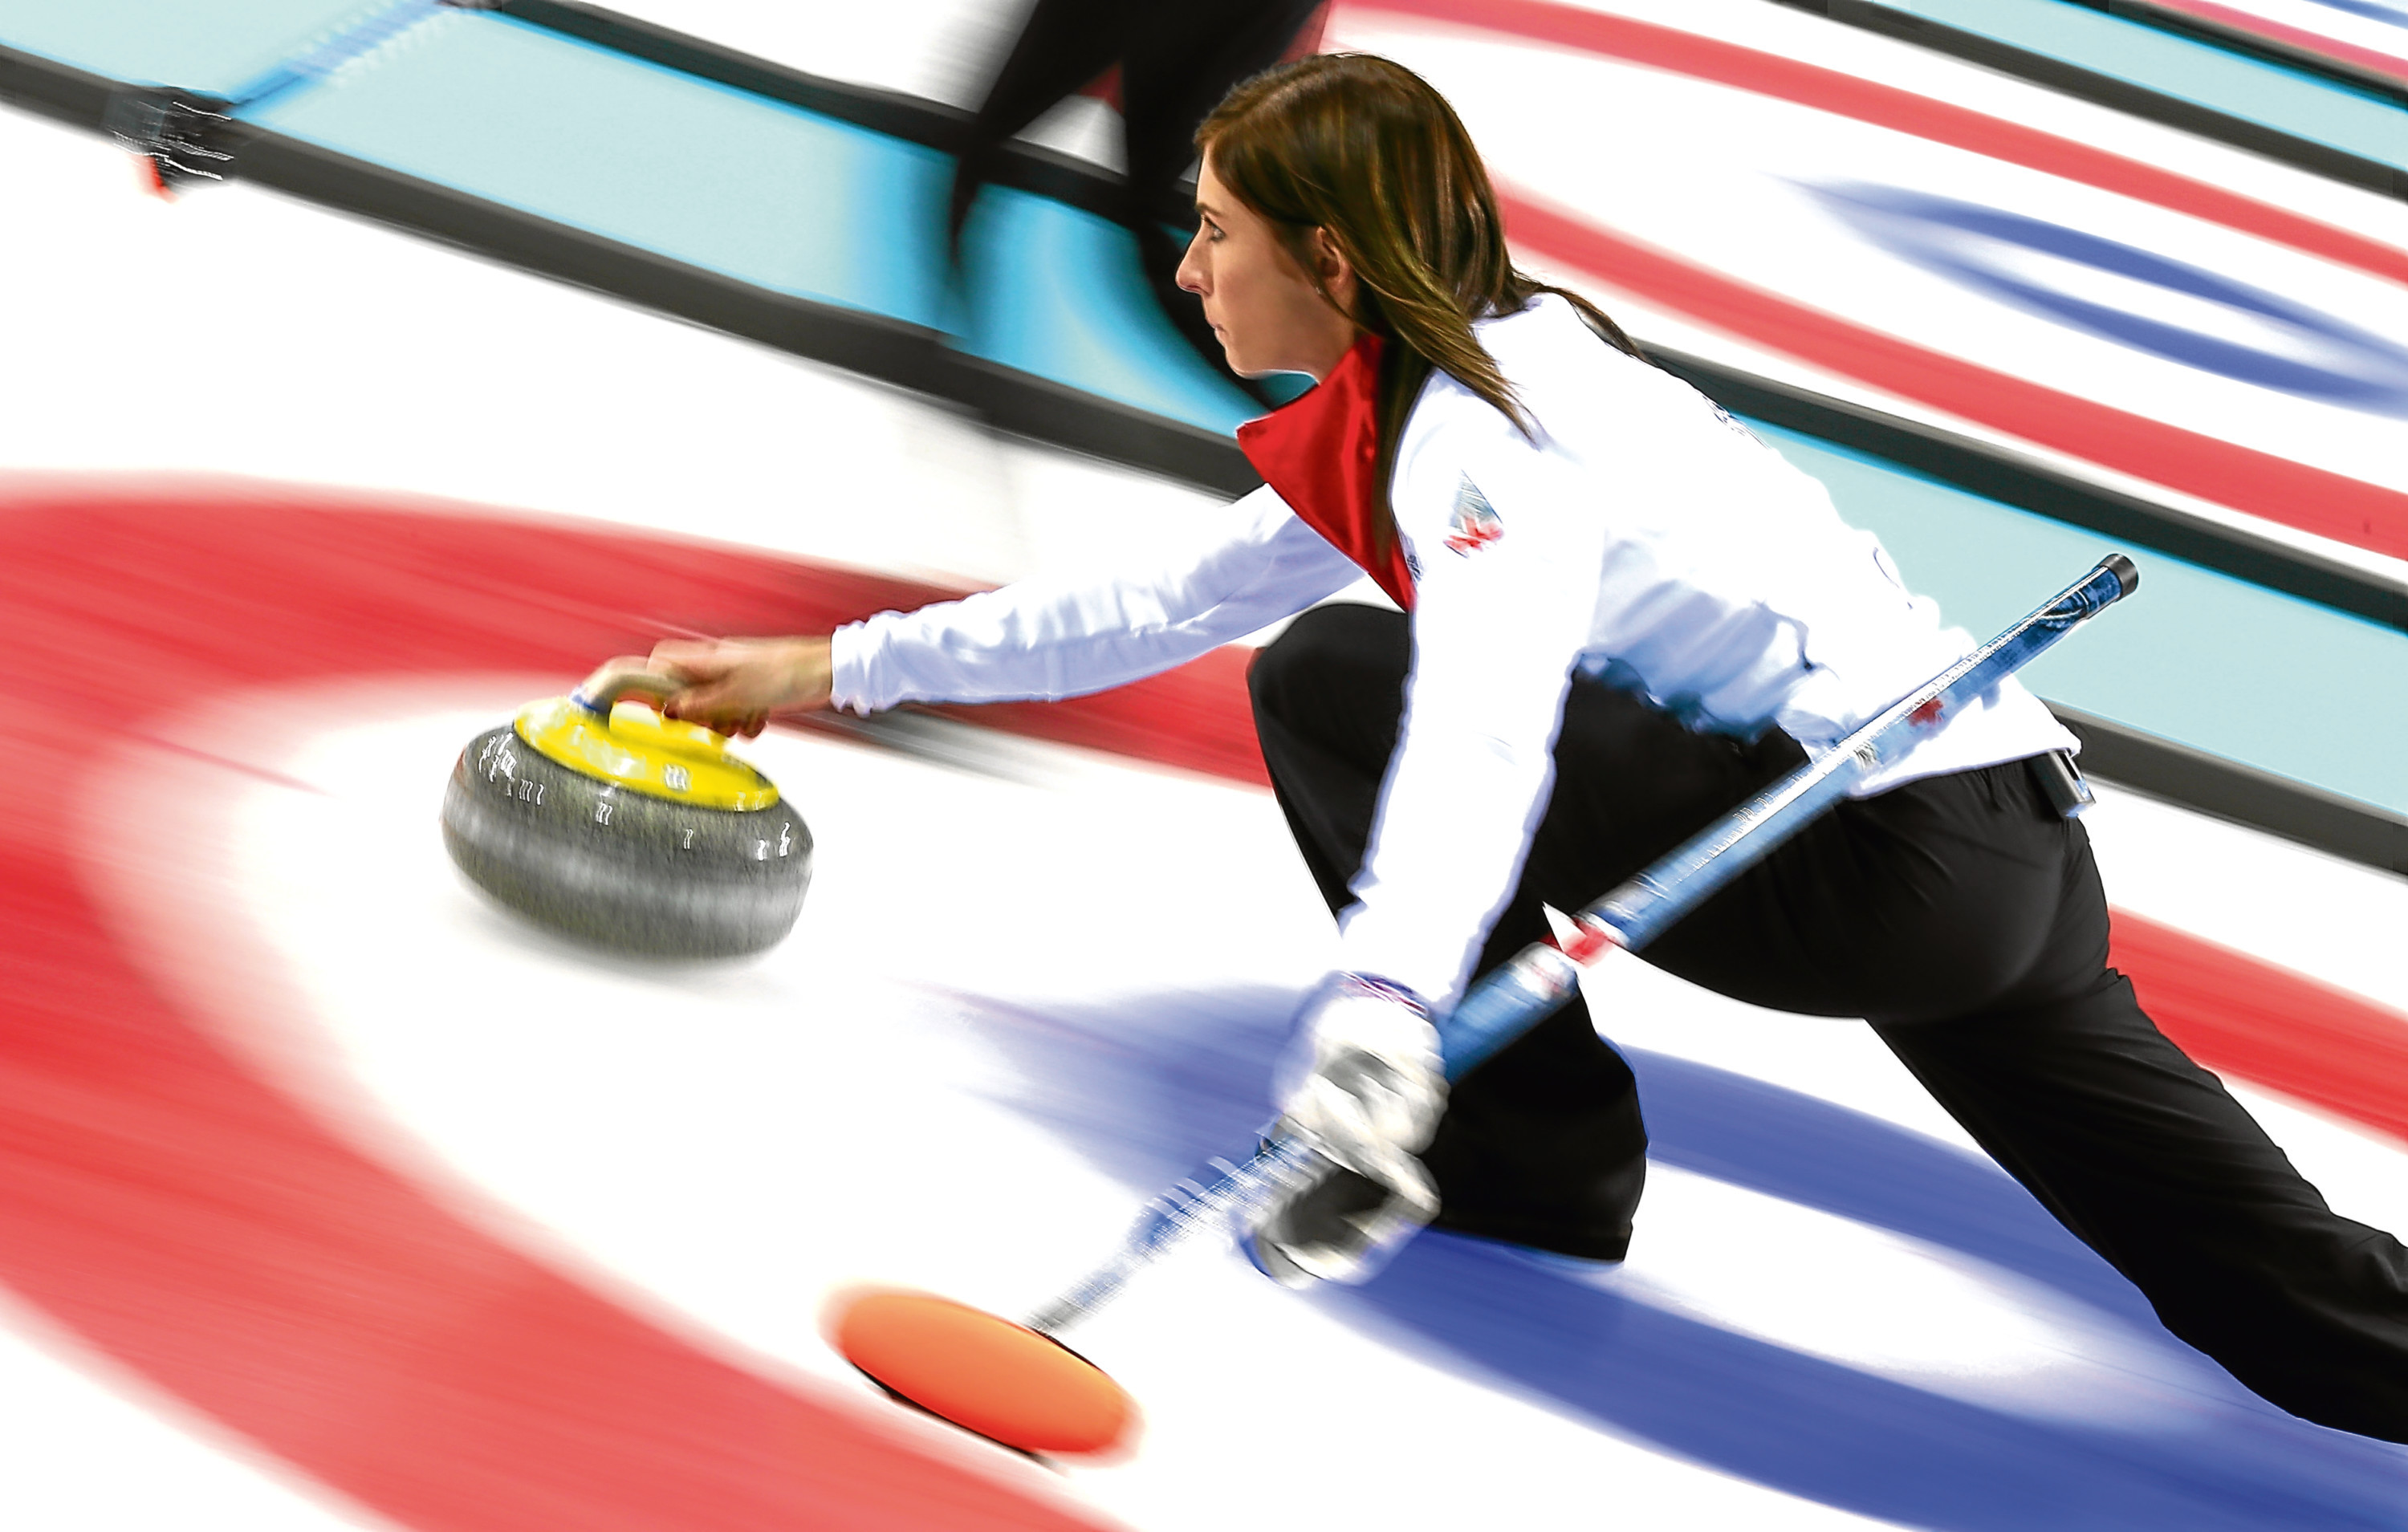 SOCHI, RUSSIA - FEBRUARY 12:  Eve Muirhead of Great Britain in action during the Curling Round Robin match between Canada and Great Britain during day five of the Sochi 2014 Winter Olympics at Ice Cube Curling Center on February 12, 2014 in Sochi, Russia.  (Photo by Clive Mason/Getty Images)